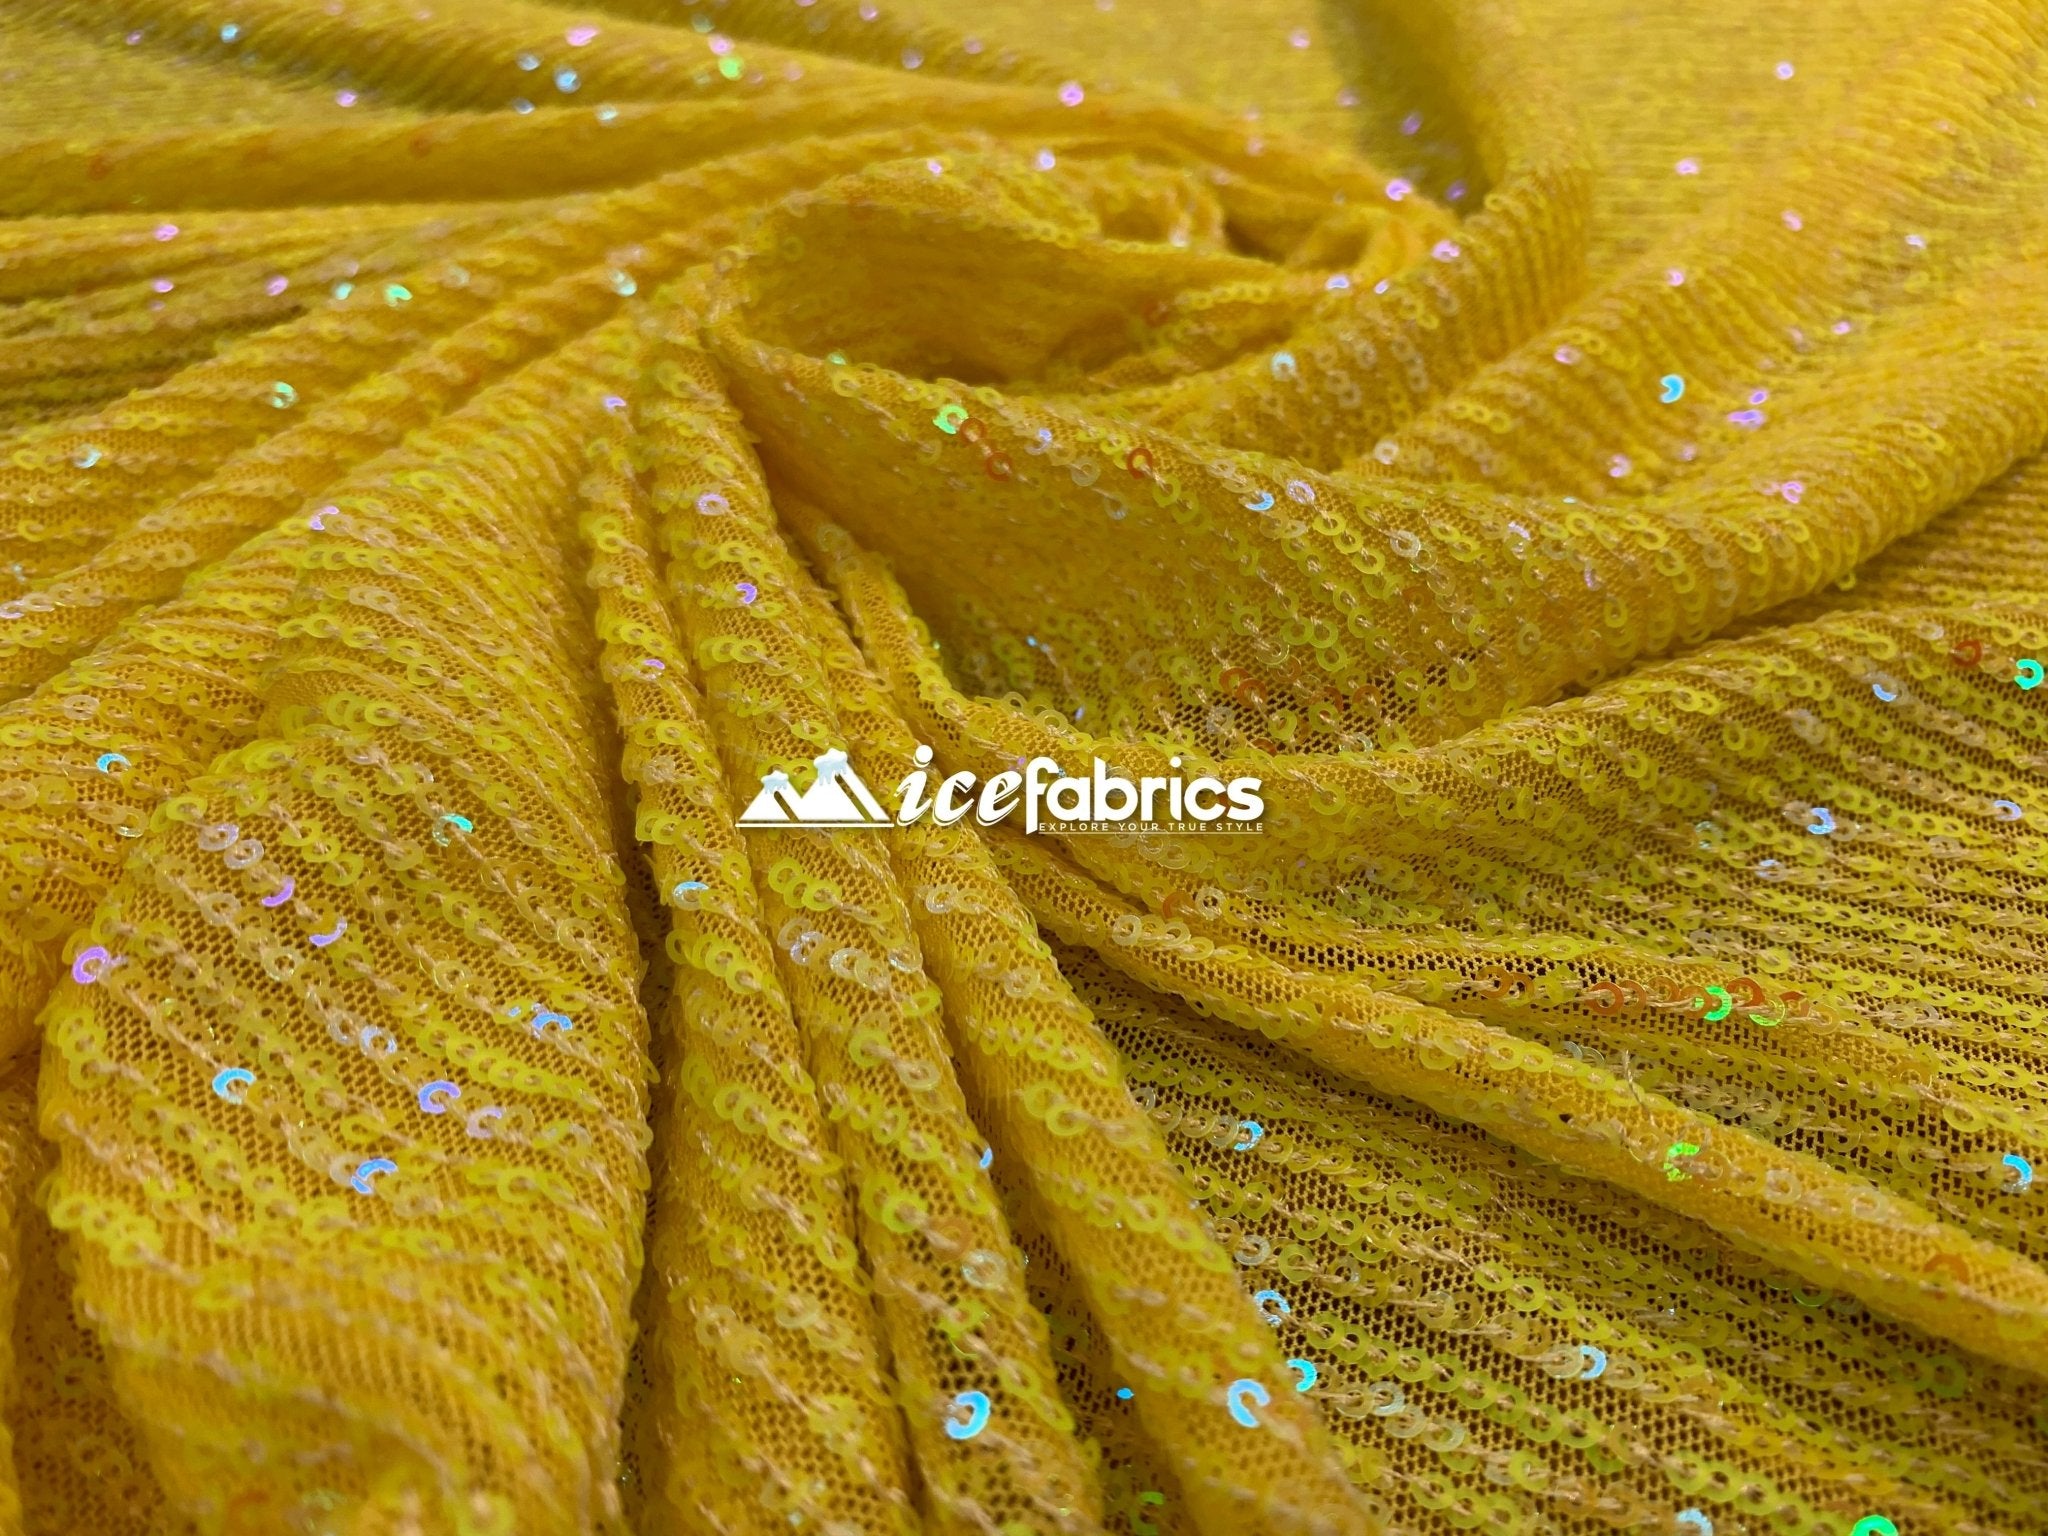 Iridescent Sequin 2 Way Mesh Stretch Sequins Fabric By The YardICEFABRICICE FABRICSYellow IridescentIridescent Sequin 2 Way Mesh Stretch Sequins Fabric By The Yard ICEFABRIC Yellow Iridescent